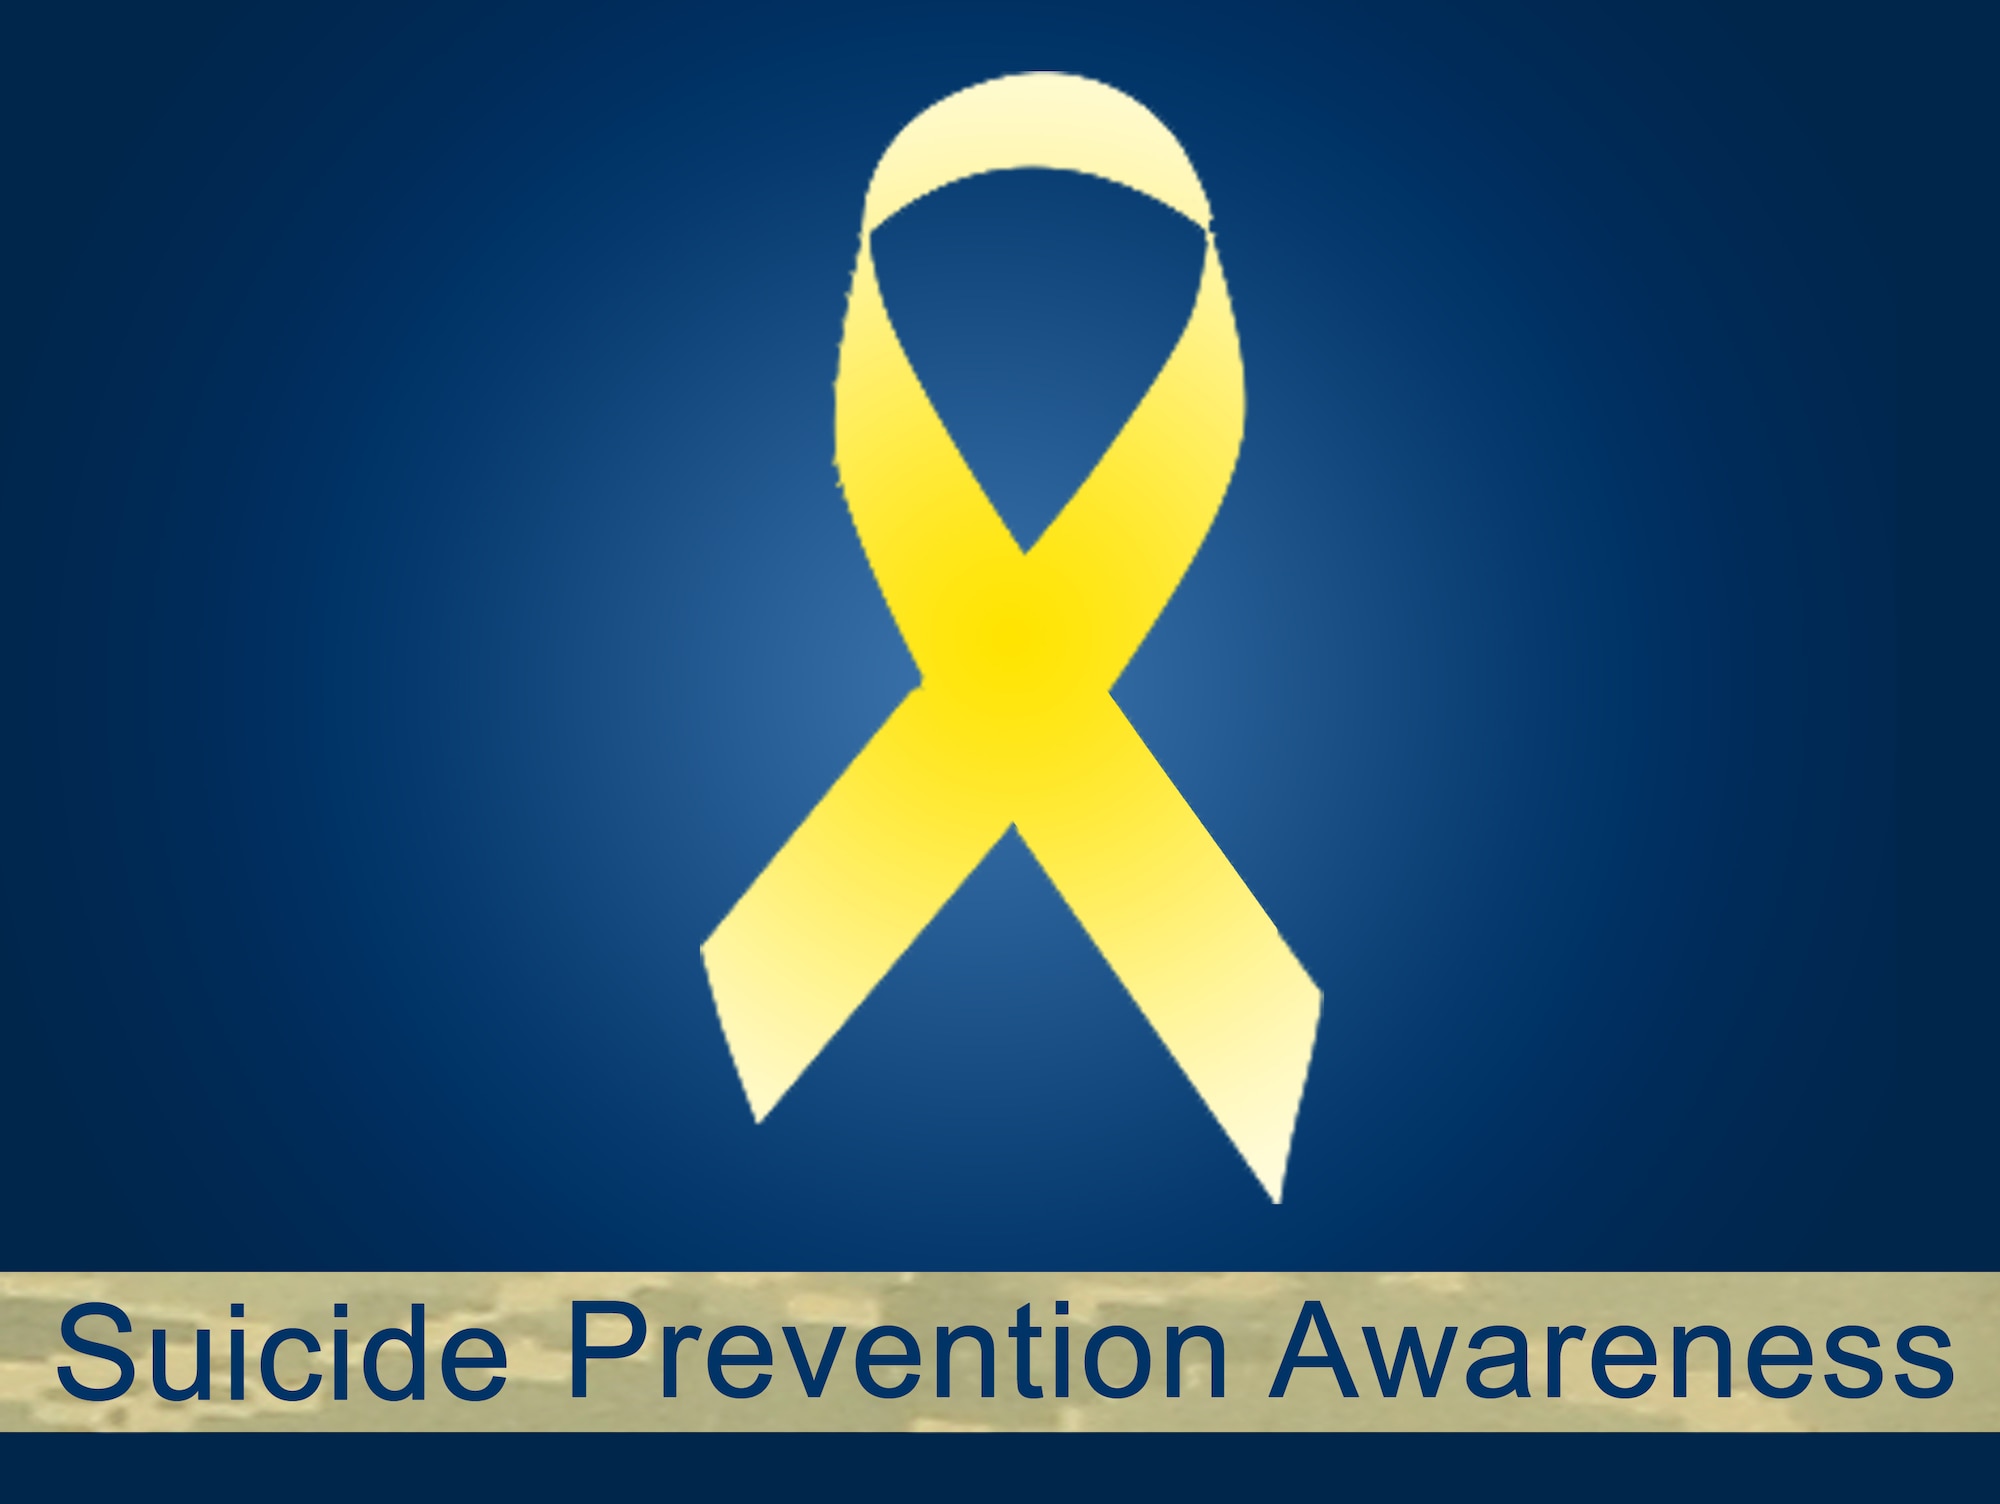 The Department of Defense recognizes Suicide Prevention Awareness Month every September. The Air Force uses the ACE program to identify and get help for suicidal wingmen. ACE stands for: Ask directly, "Are you thinking of killing yourself?"; Care, intervene or control the situation; Escort them to a primary care provider, Chaplain or mental health professional. The easiest resource for active duty members is calling the mental health clinic at (919) 722-1883. (U.S. Air Force photo illustration by Senior Airman Aubrey White)